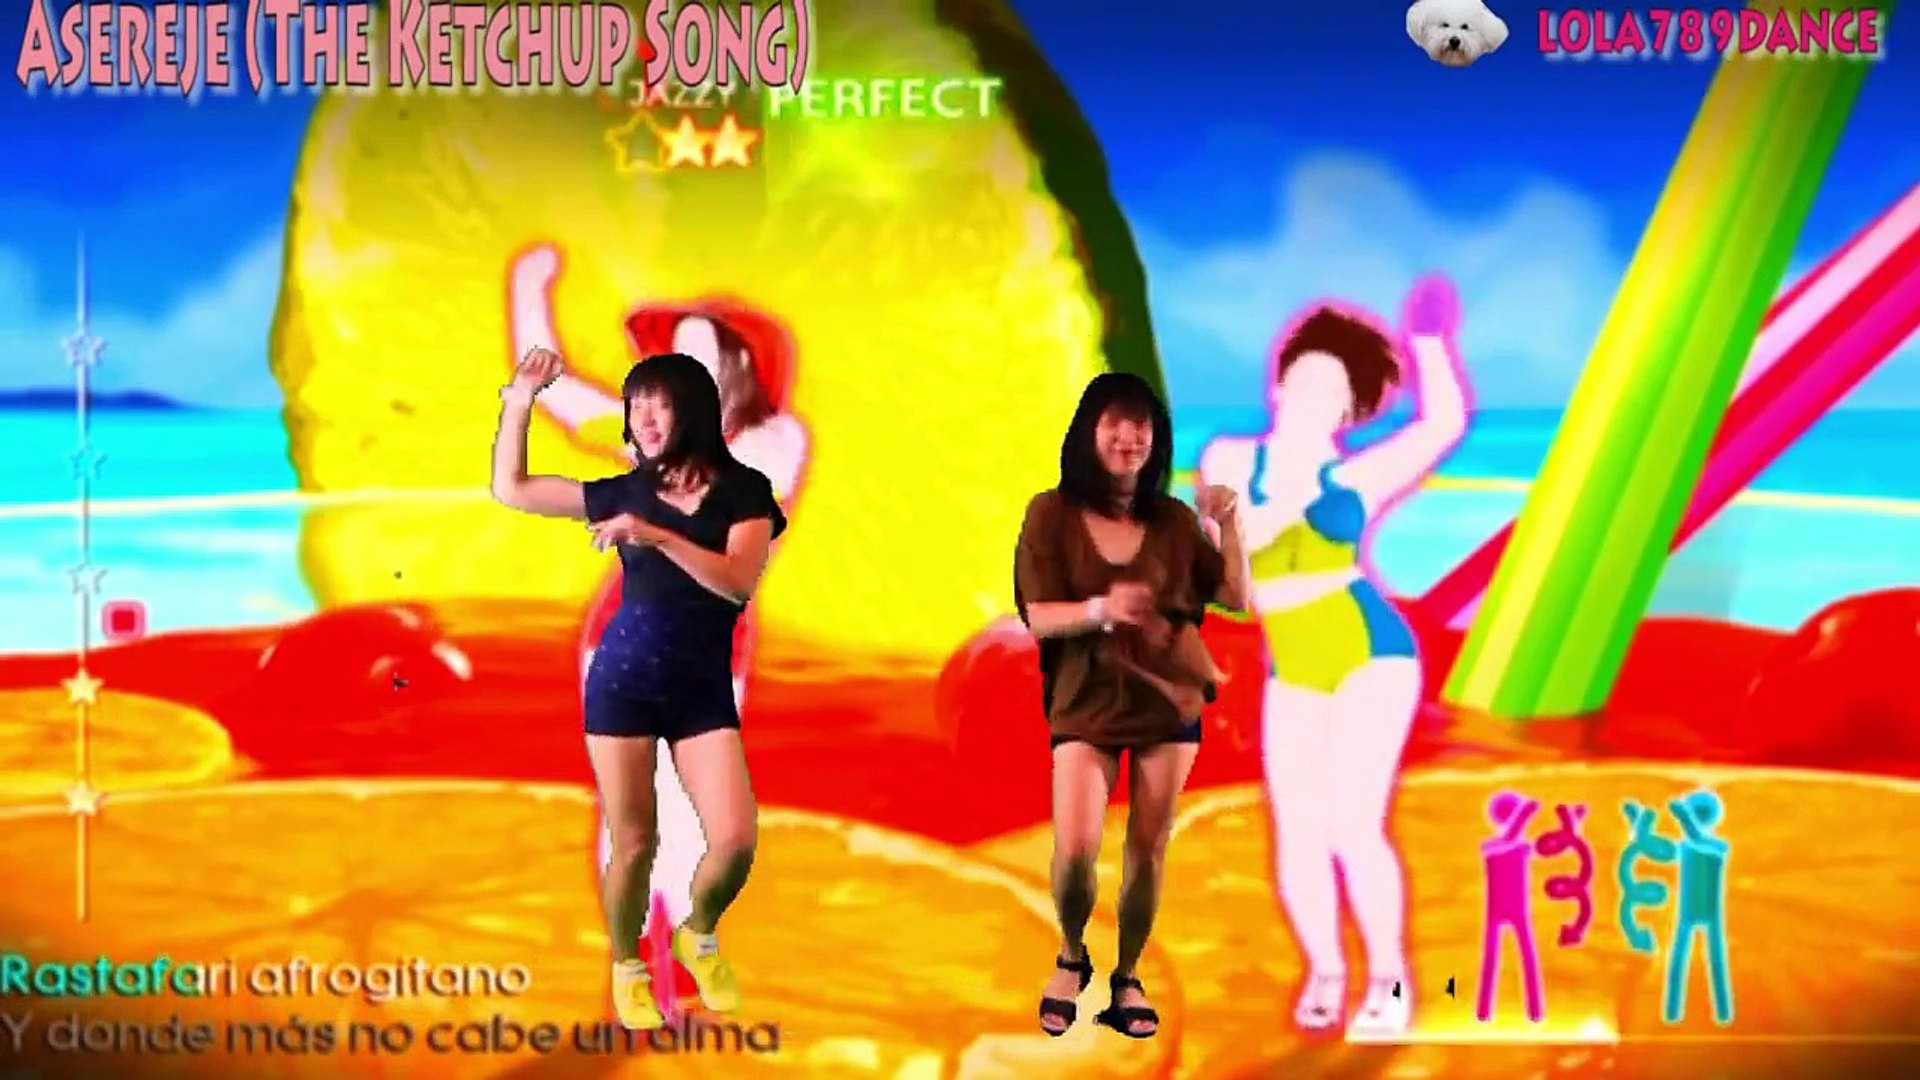 Just Dance 4-Asereje (The Ketchup Song) 5 stars - video Dailymotion